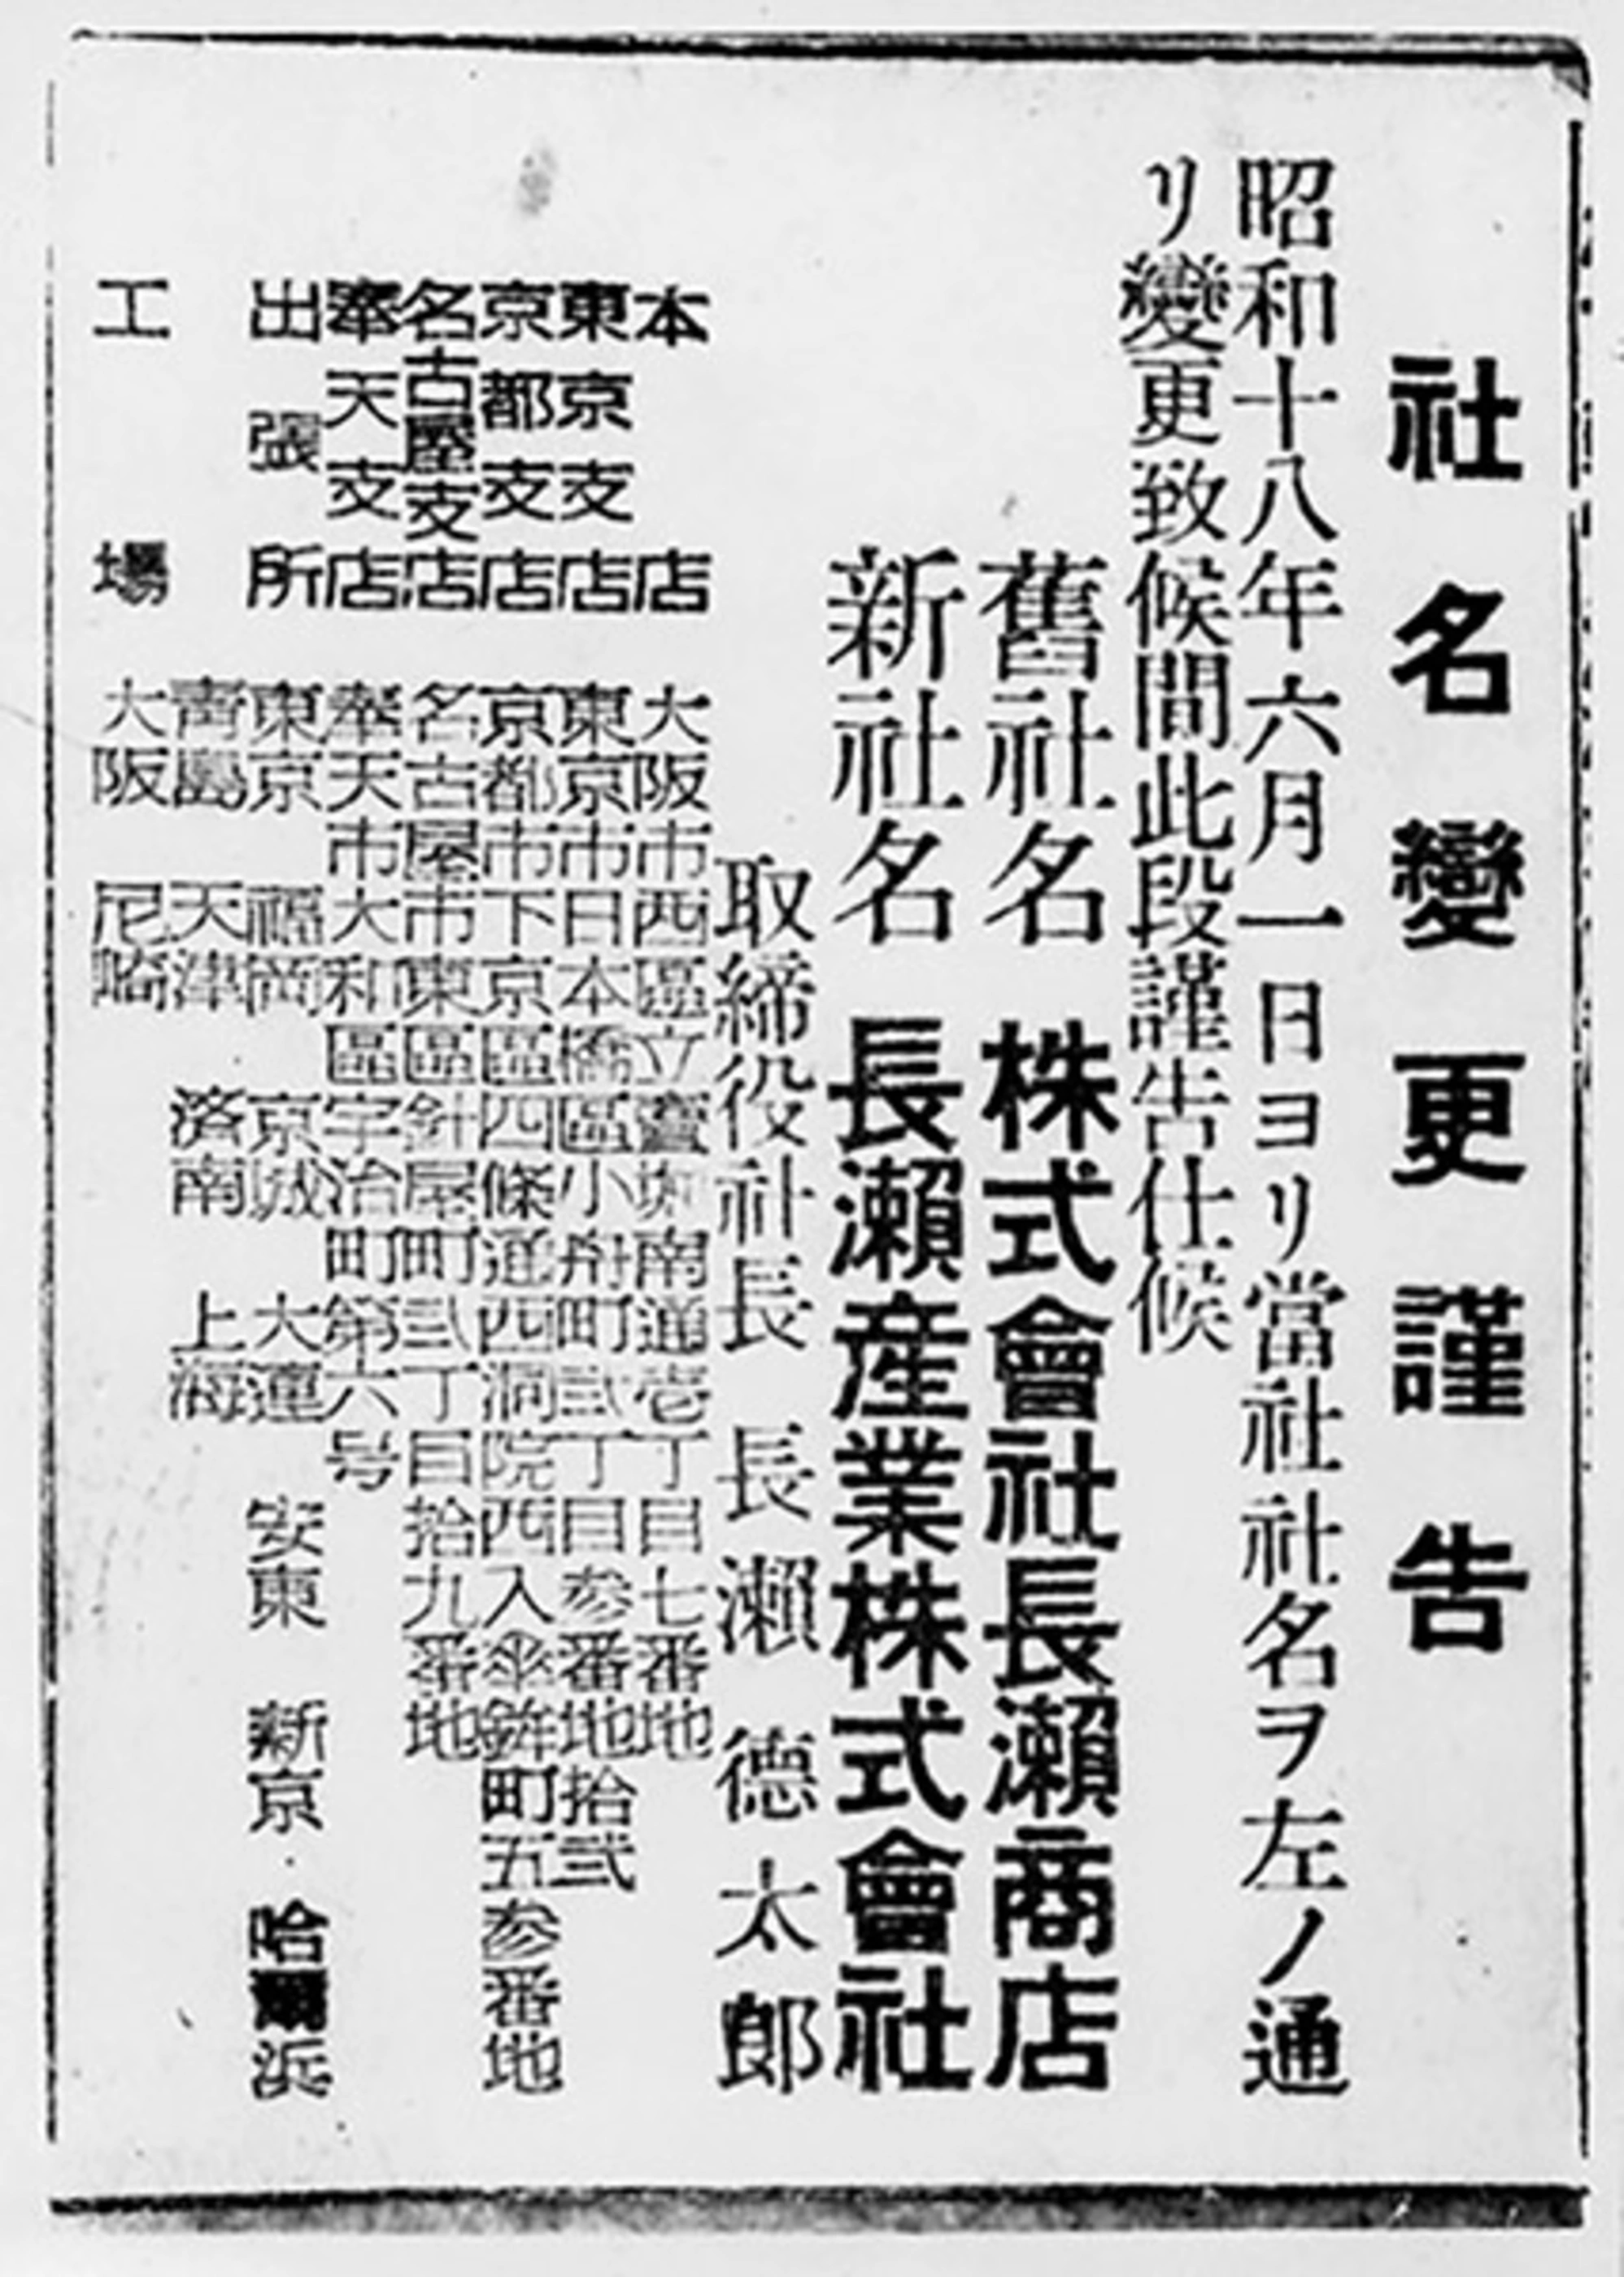 Advertisement of Nagase's name change in June 1943